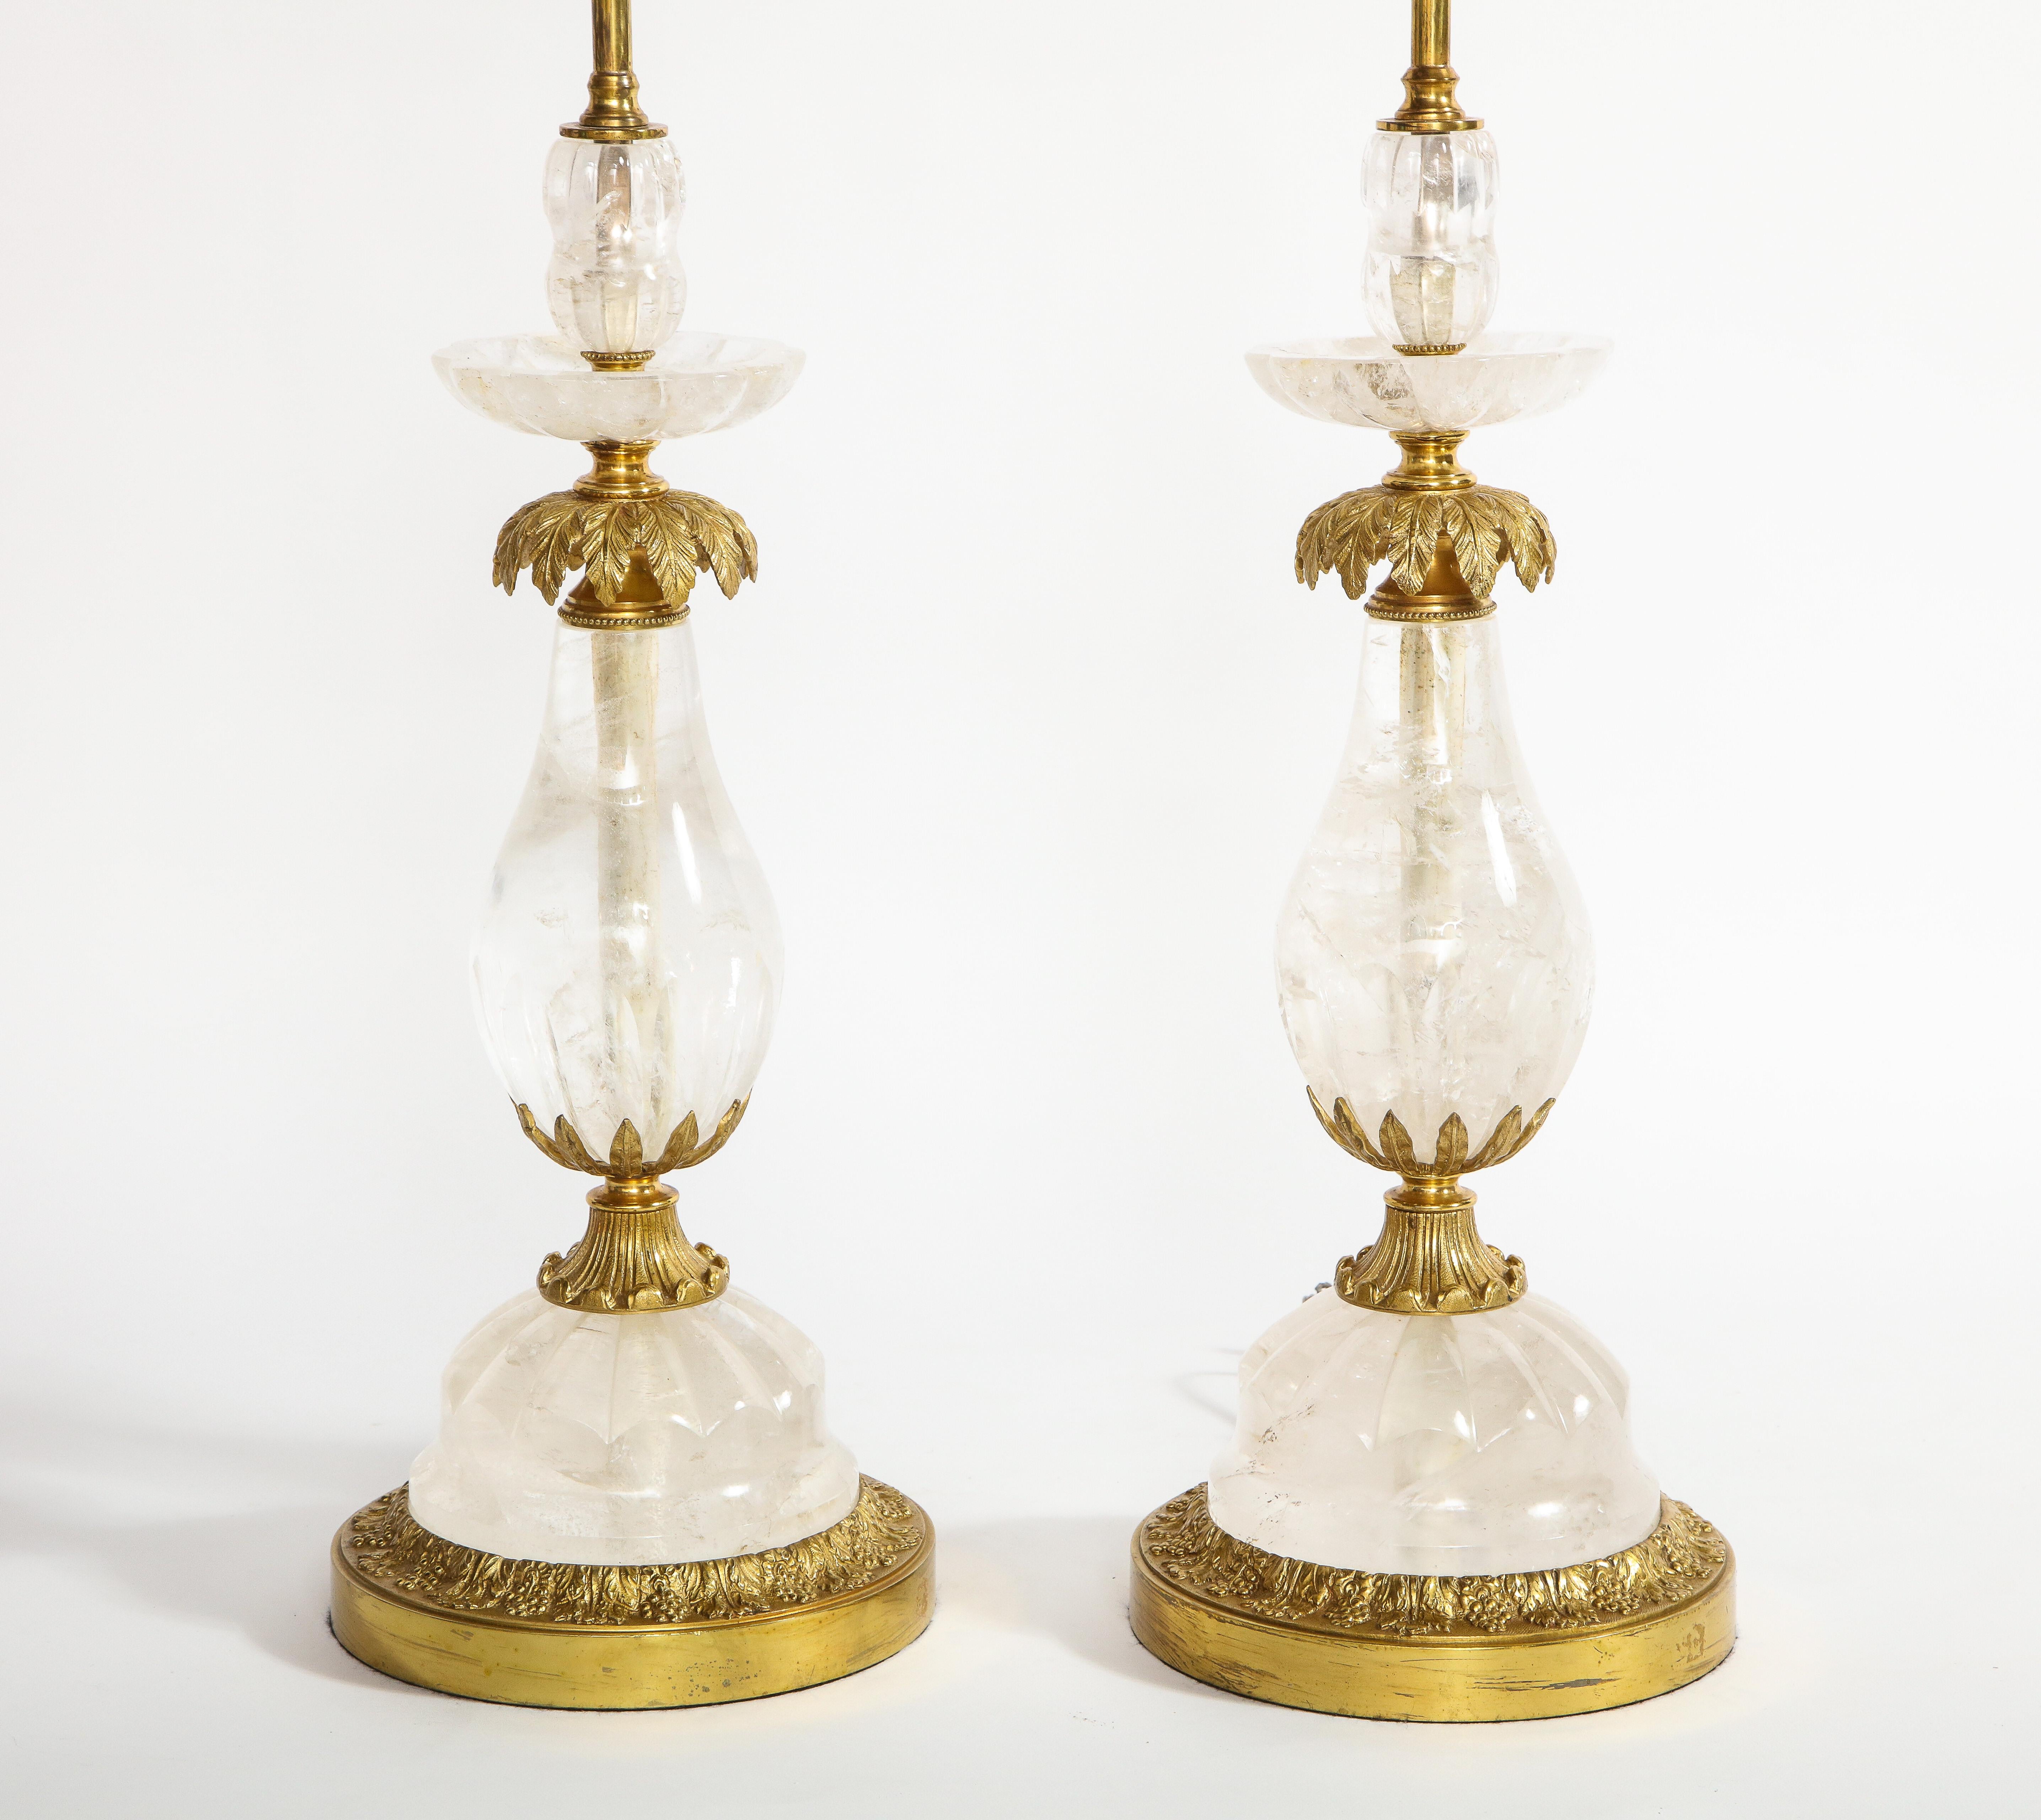 A superb pair of Art Deco ormolu mounted palm tree form clear rock crystal quartz lamps, Attributed to E.F. Caldwell. Each lamp is made with multiple sections of hand carved, polished and faceted clear rock crystal quartz which is surmounted on dore